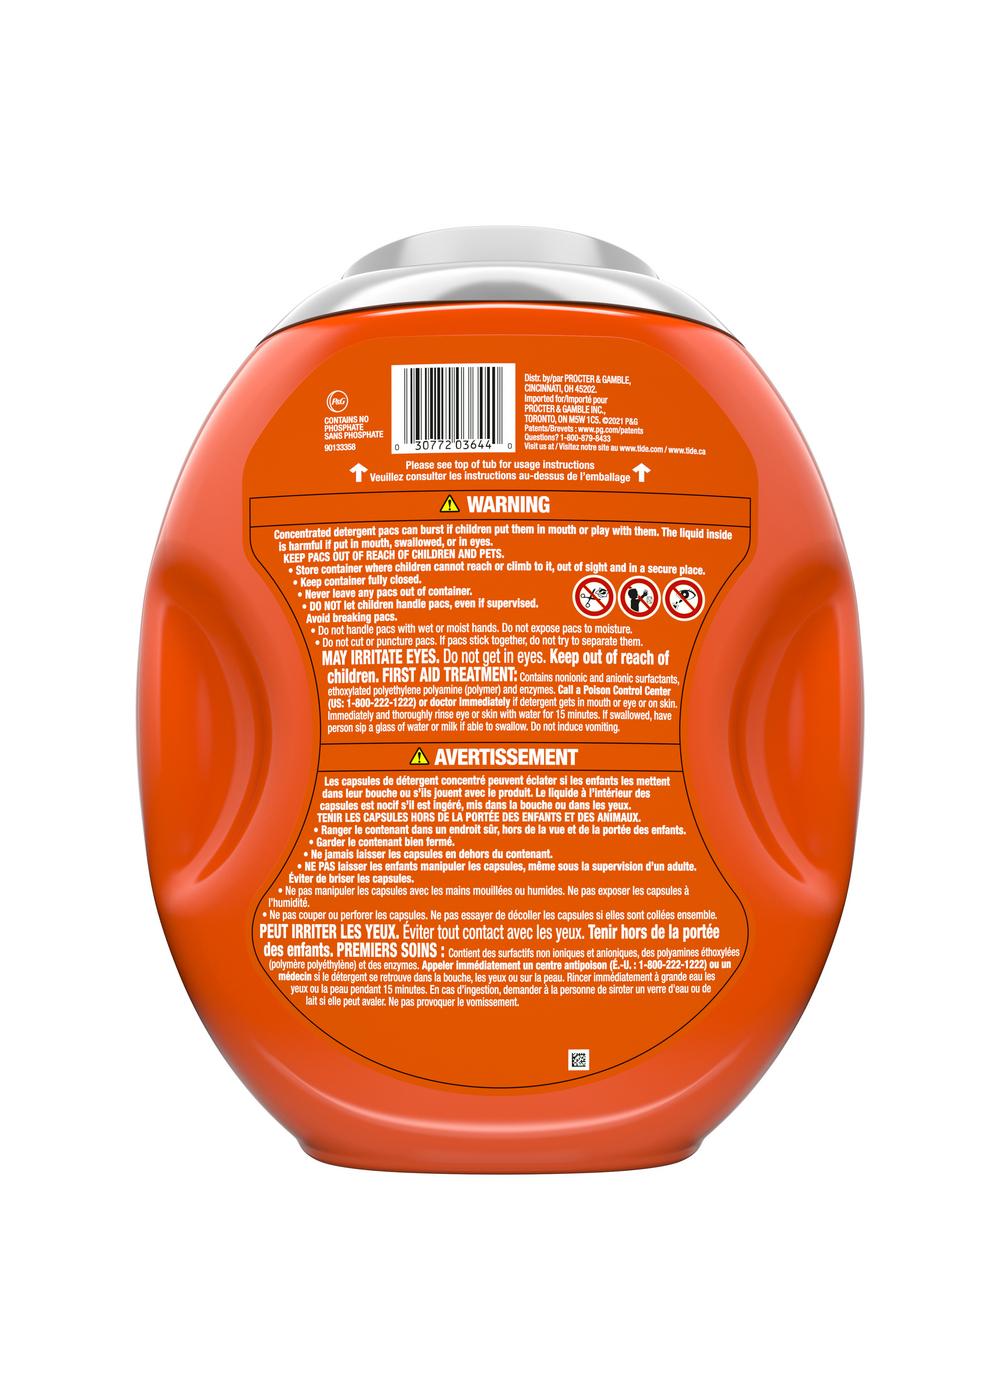 Tide Power PODS Hygienic Clean Original Scent HE Laundry Detergent Pacs; image 6 of 10